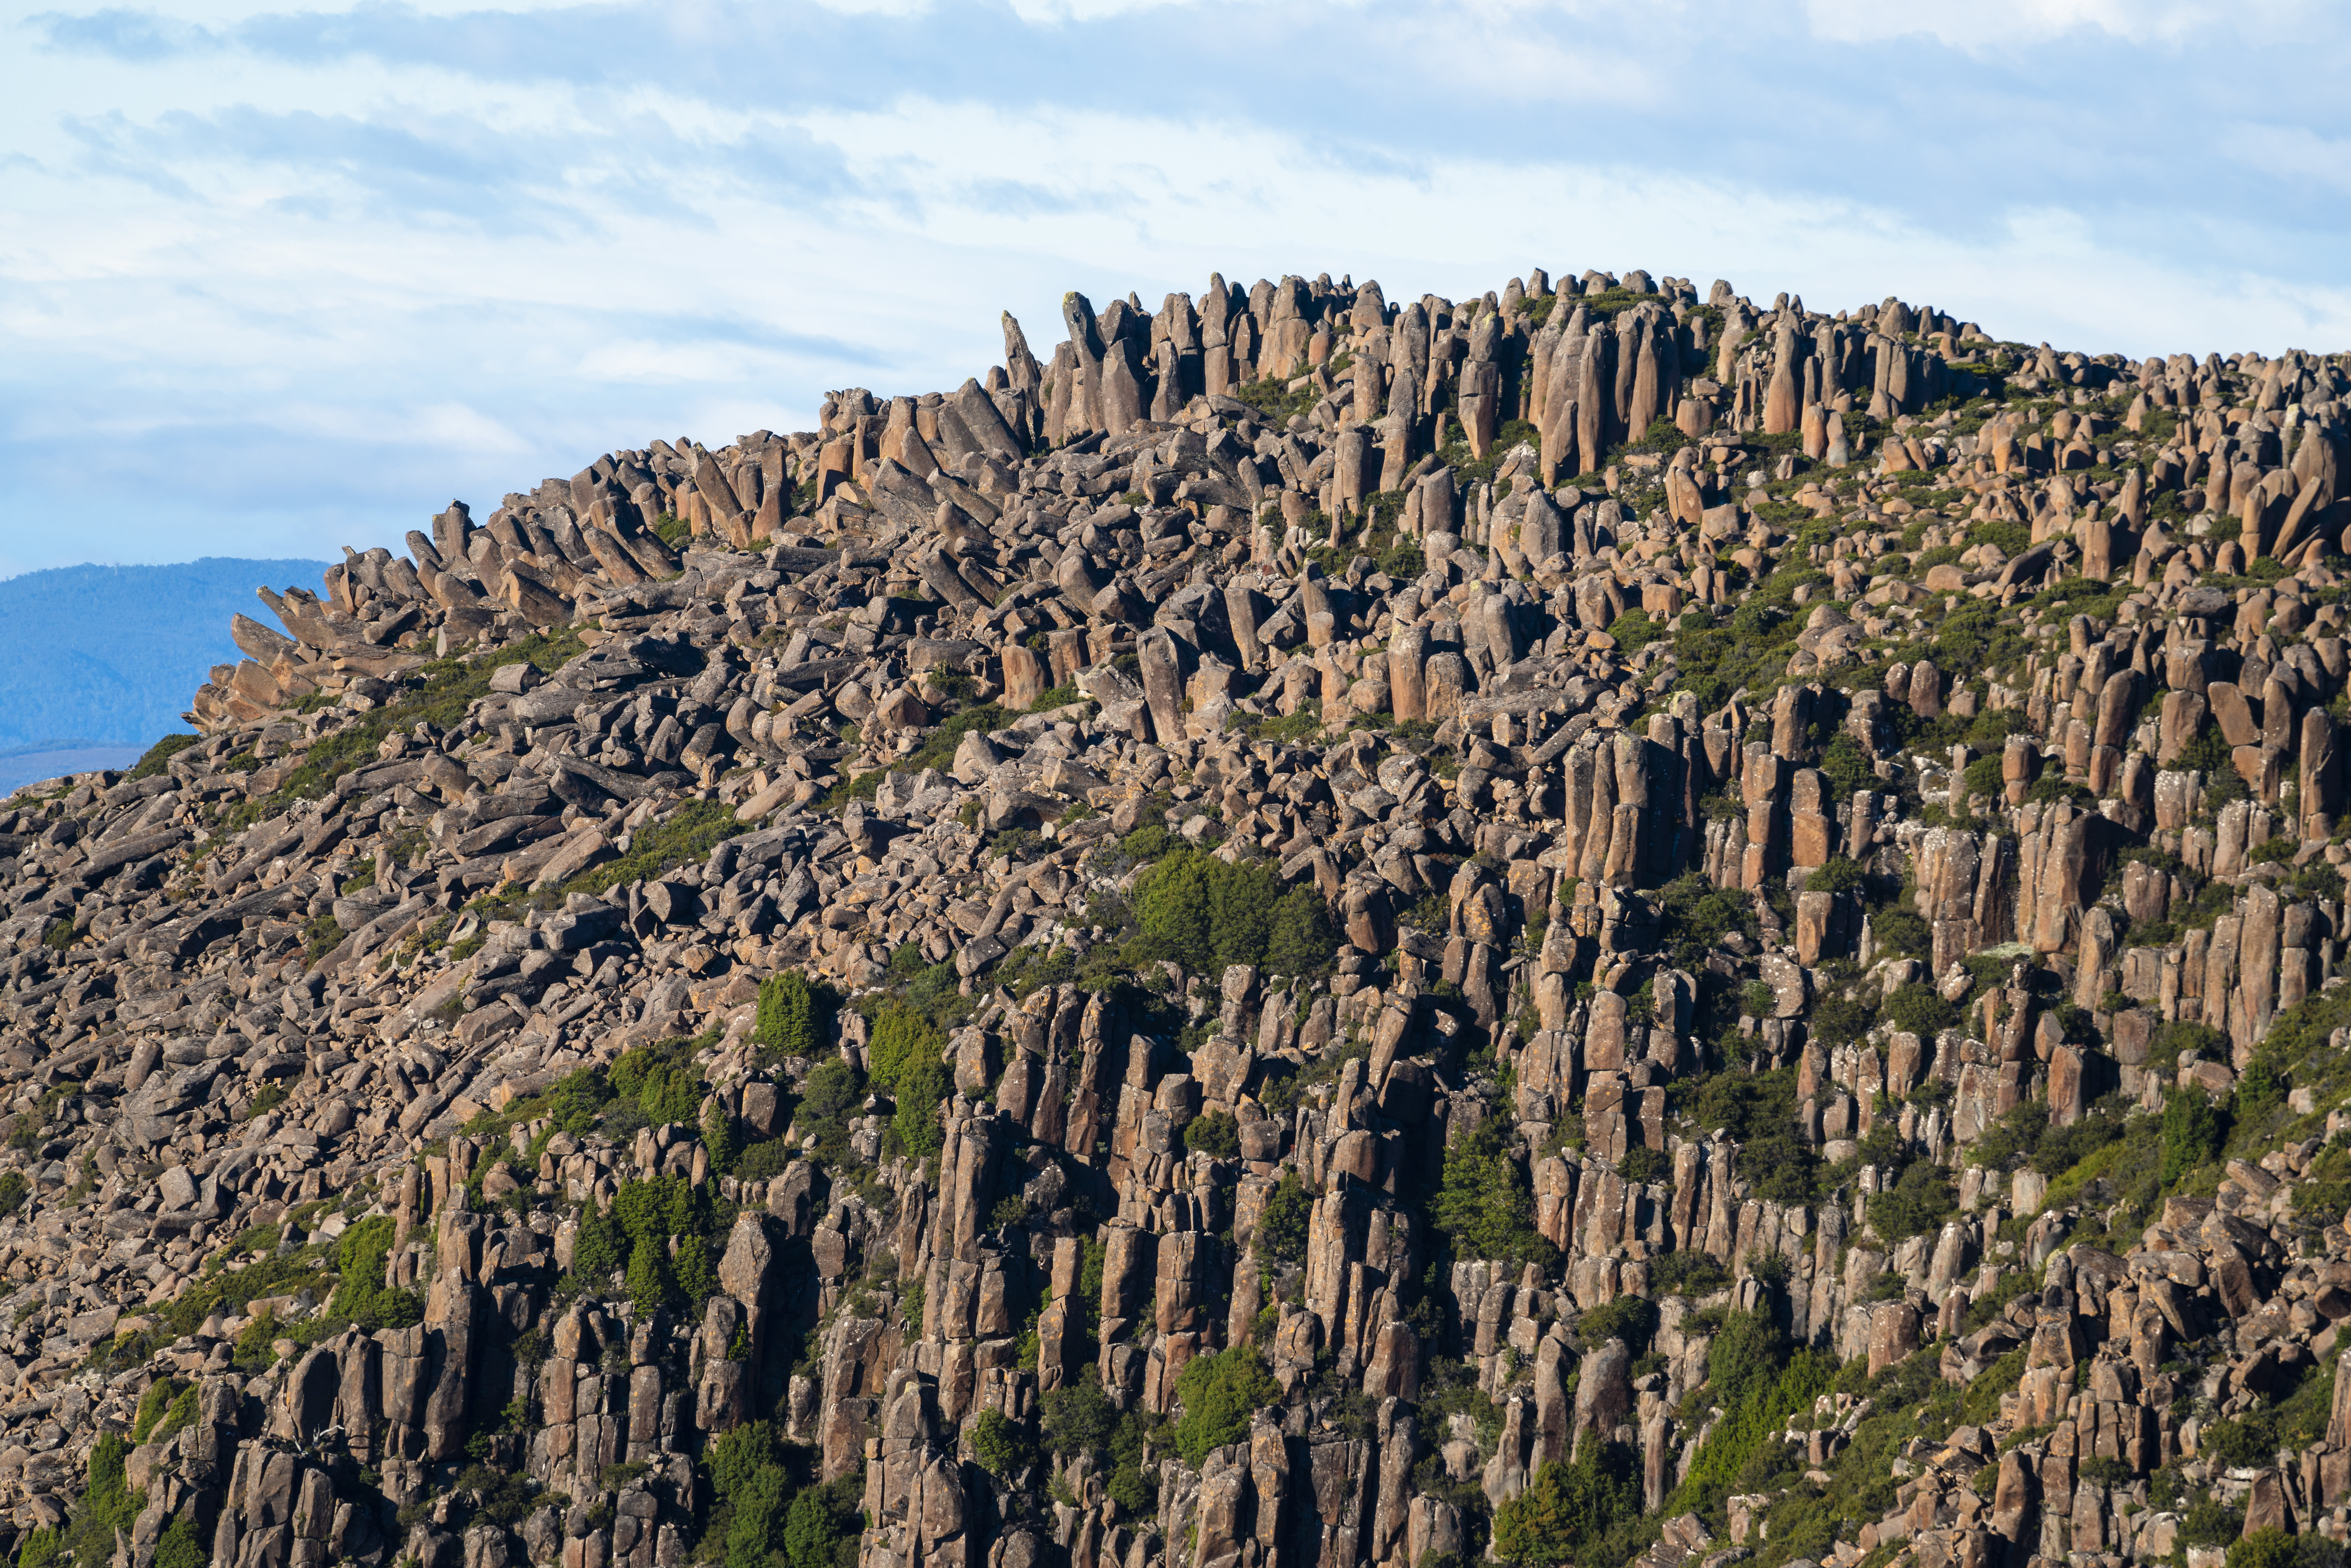 Enjoy a birds eye view from the Mount Wellington on your private geology tour